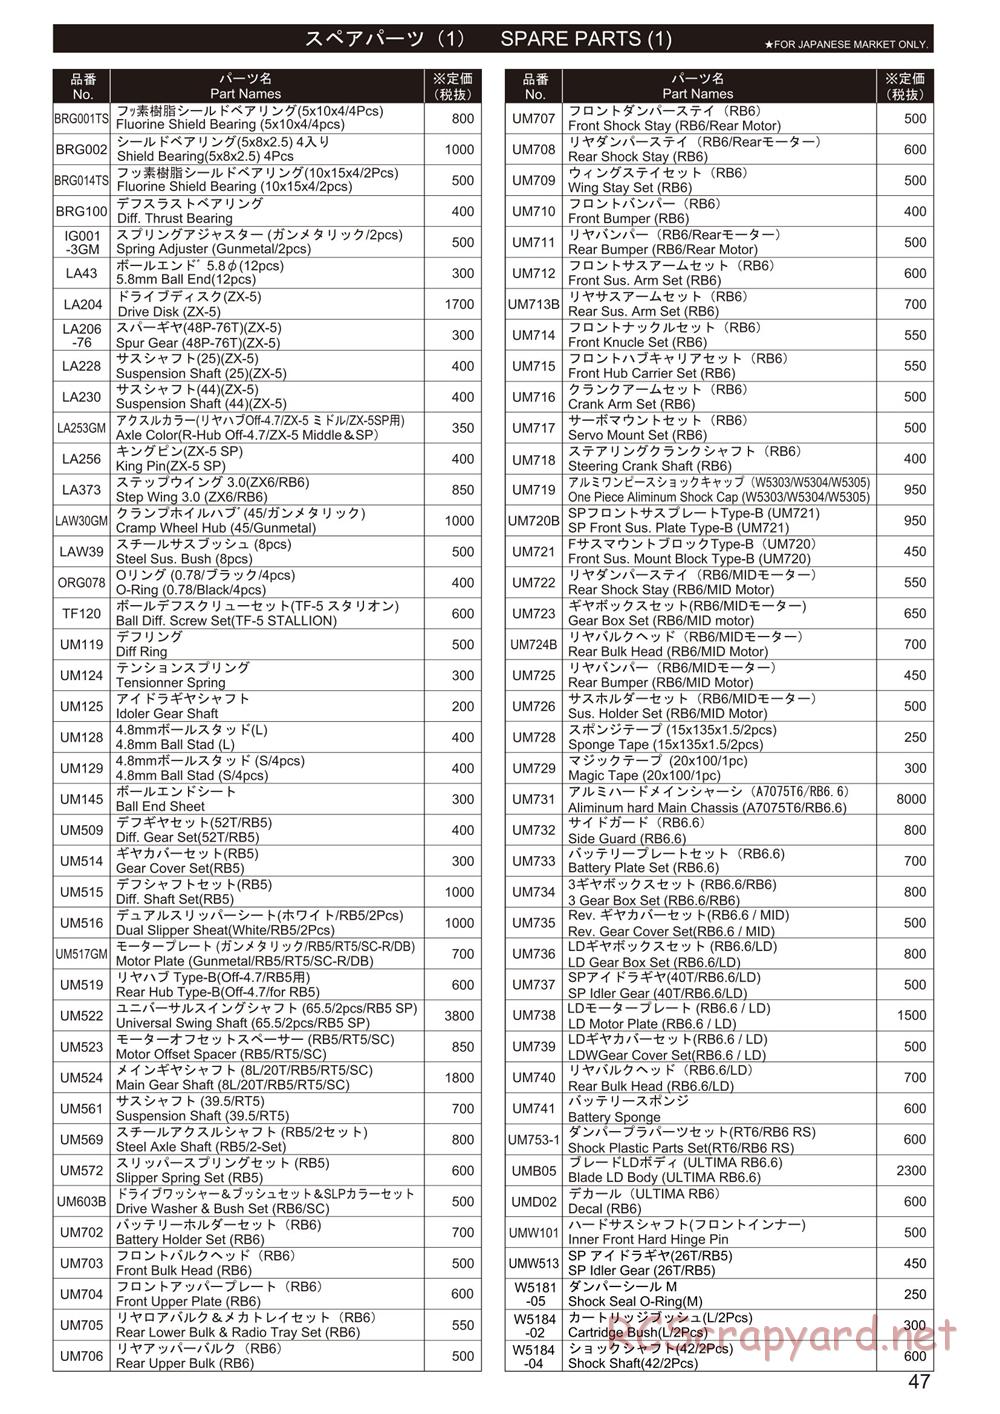 Kyosho - Ultima RB6.6 - Parts List - Page 1